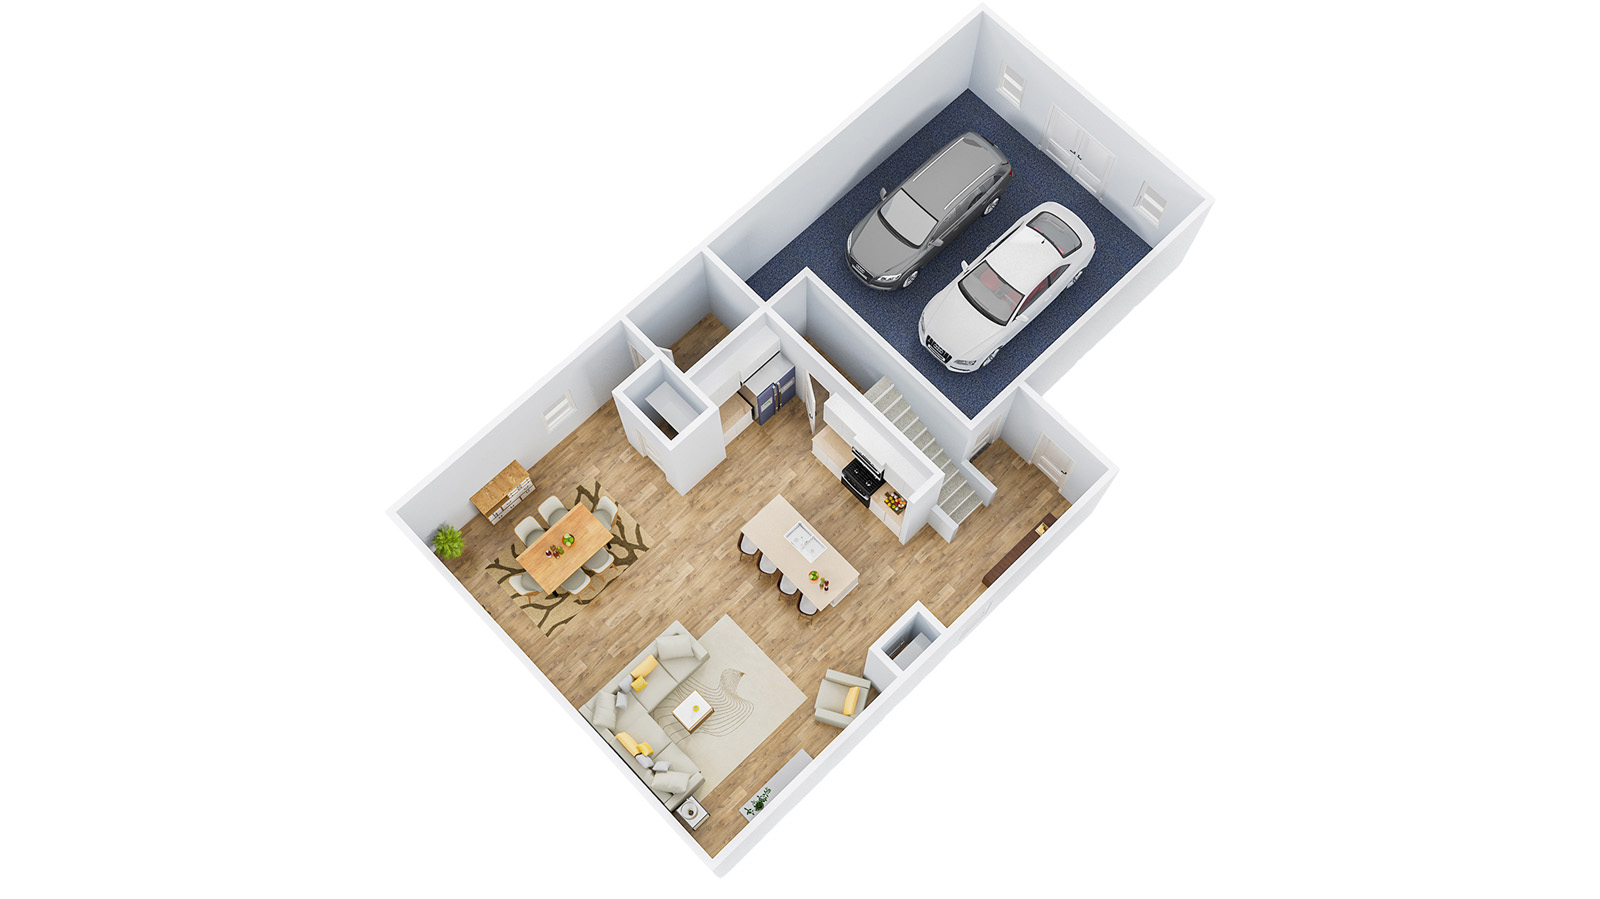 Elston-Floorplan- First Floor - 3D- Floorplan with furniture located throughout the home